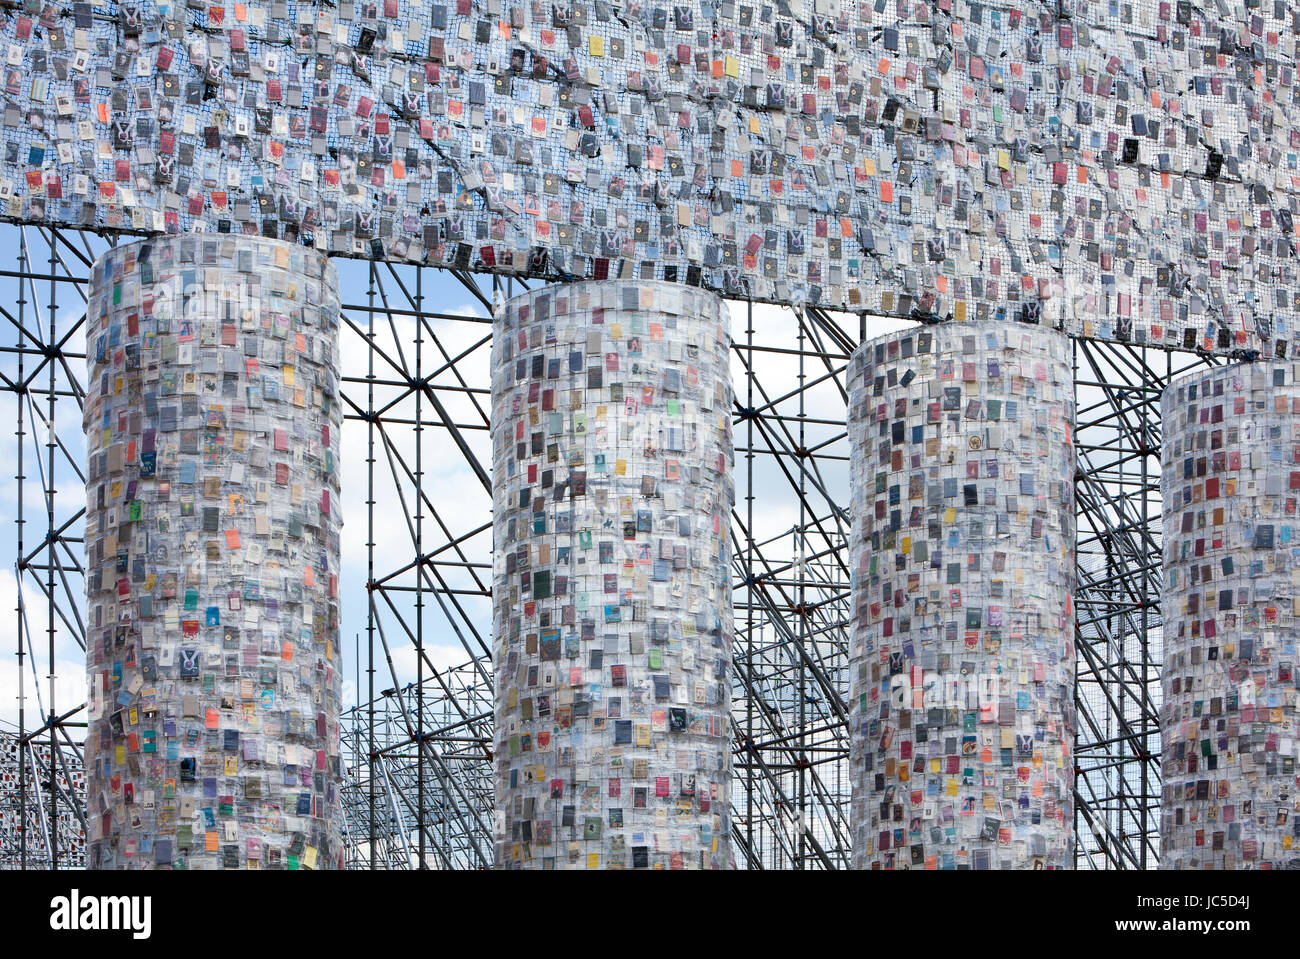 'The Parthenon of Books' by the Argentinian conceptual artist Marta Minujin, documenta 14 exhibition, 2017, Kassel, Germany, Europe Stock Photo